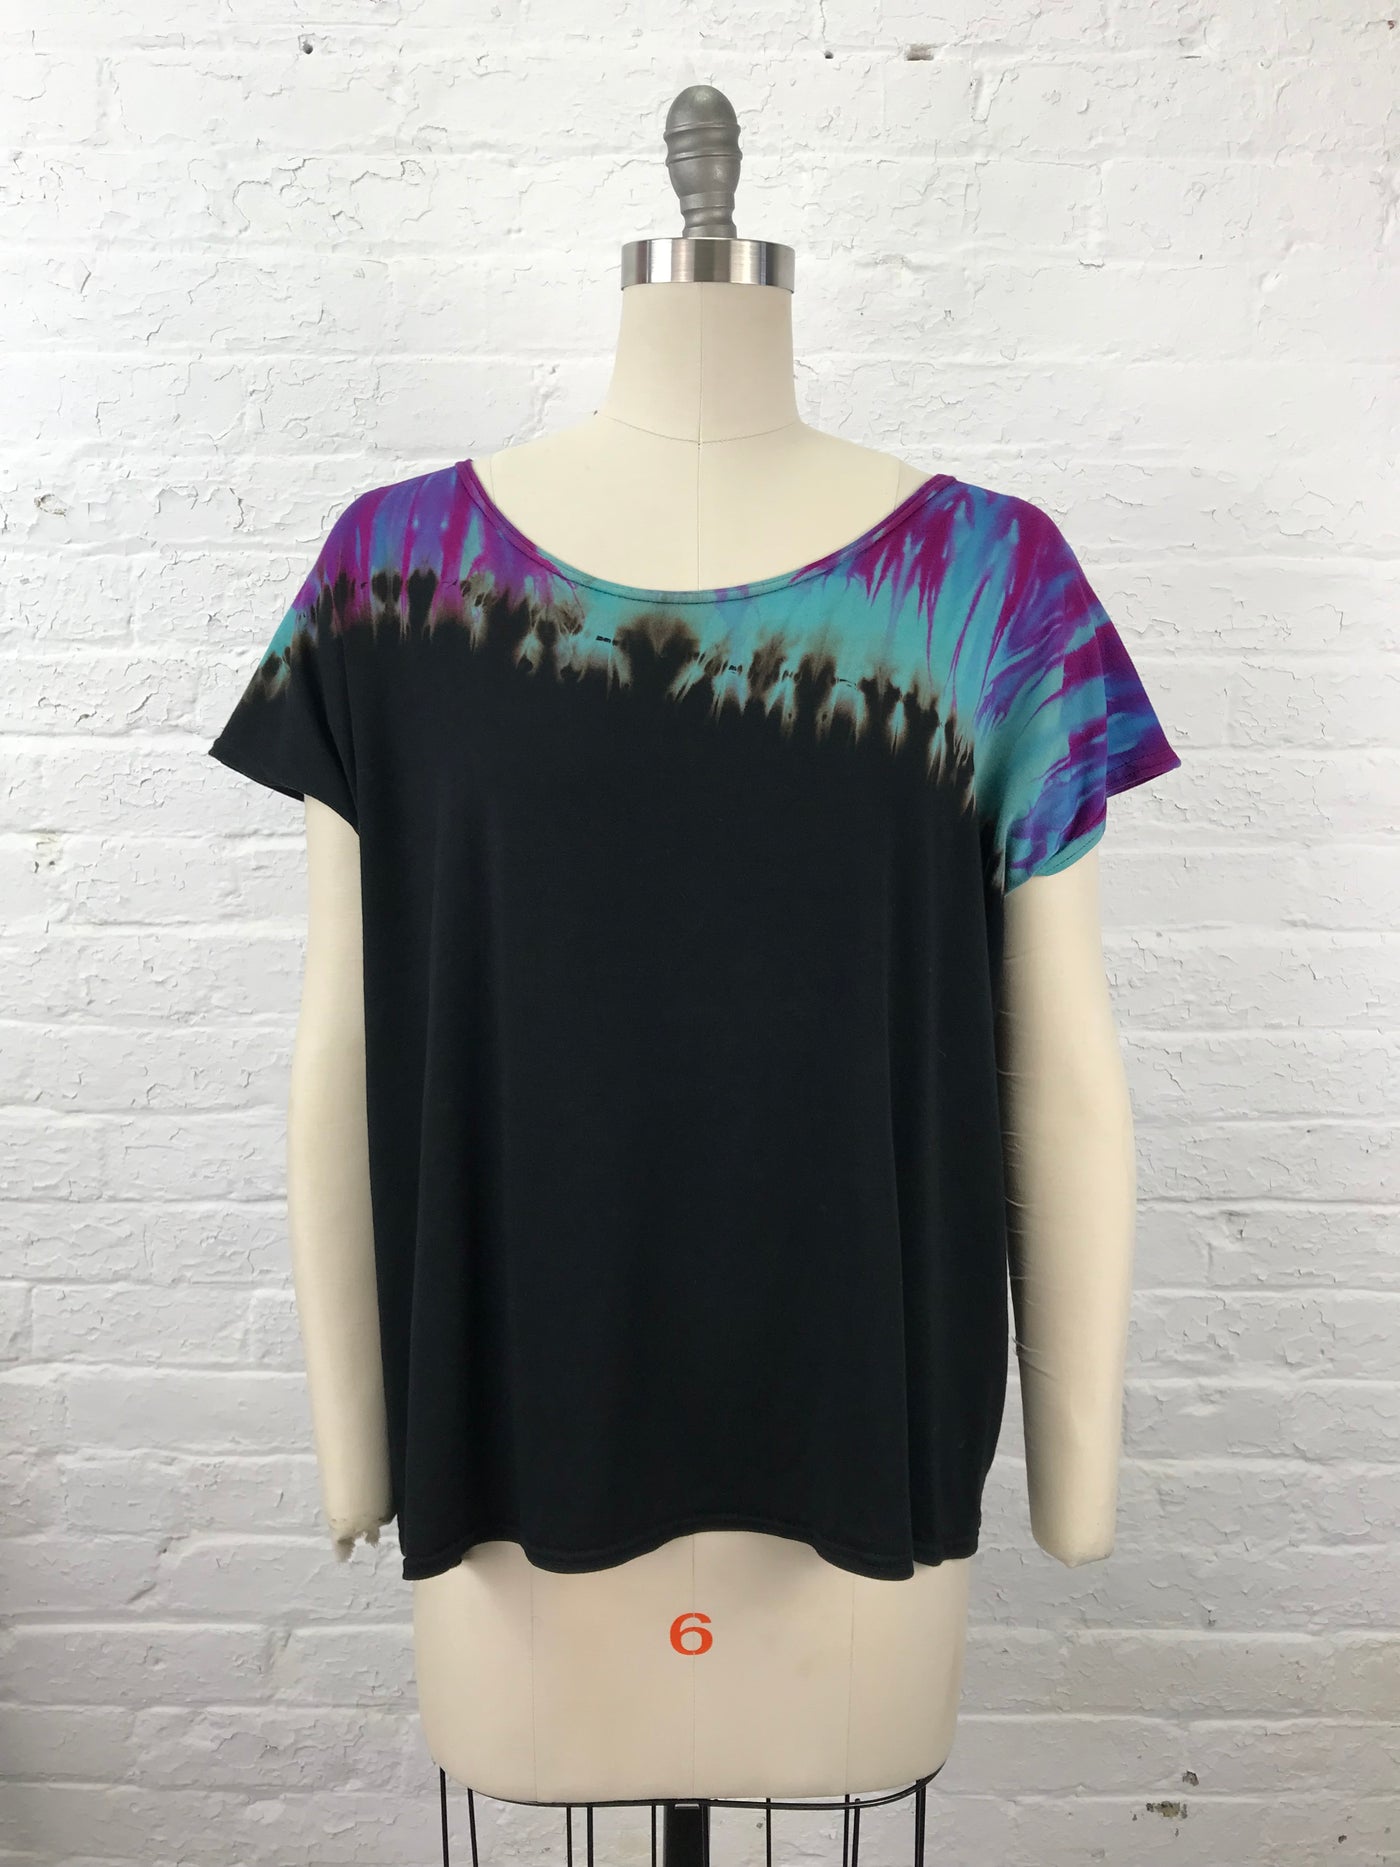 Elegant Shibori Dyed ELSIE TOP in Hawaiian Holiday Drift - front view